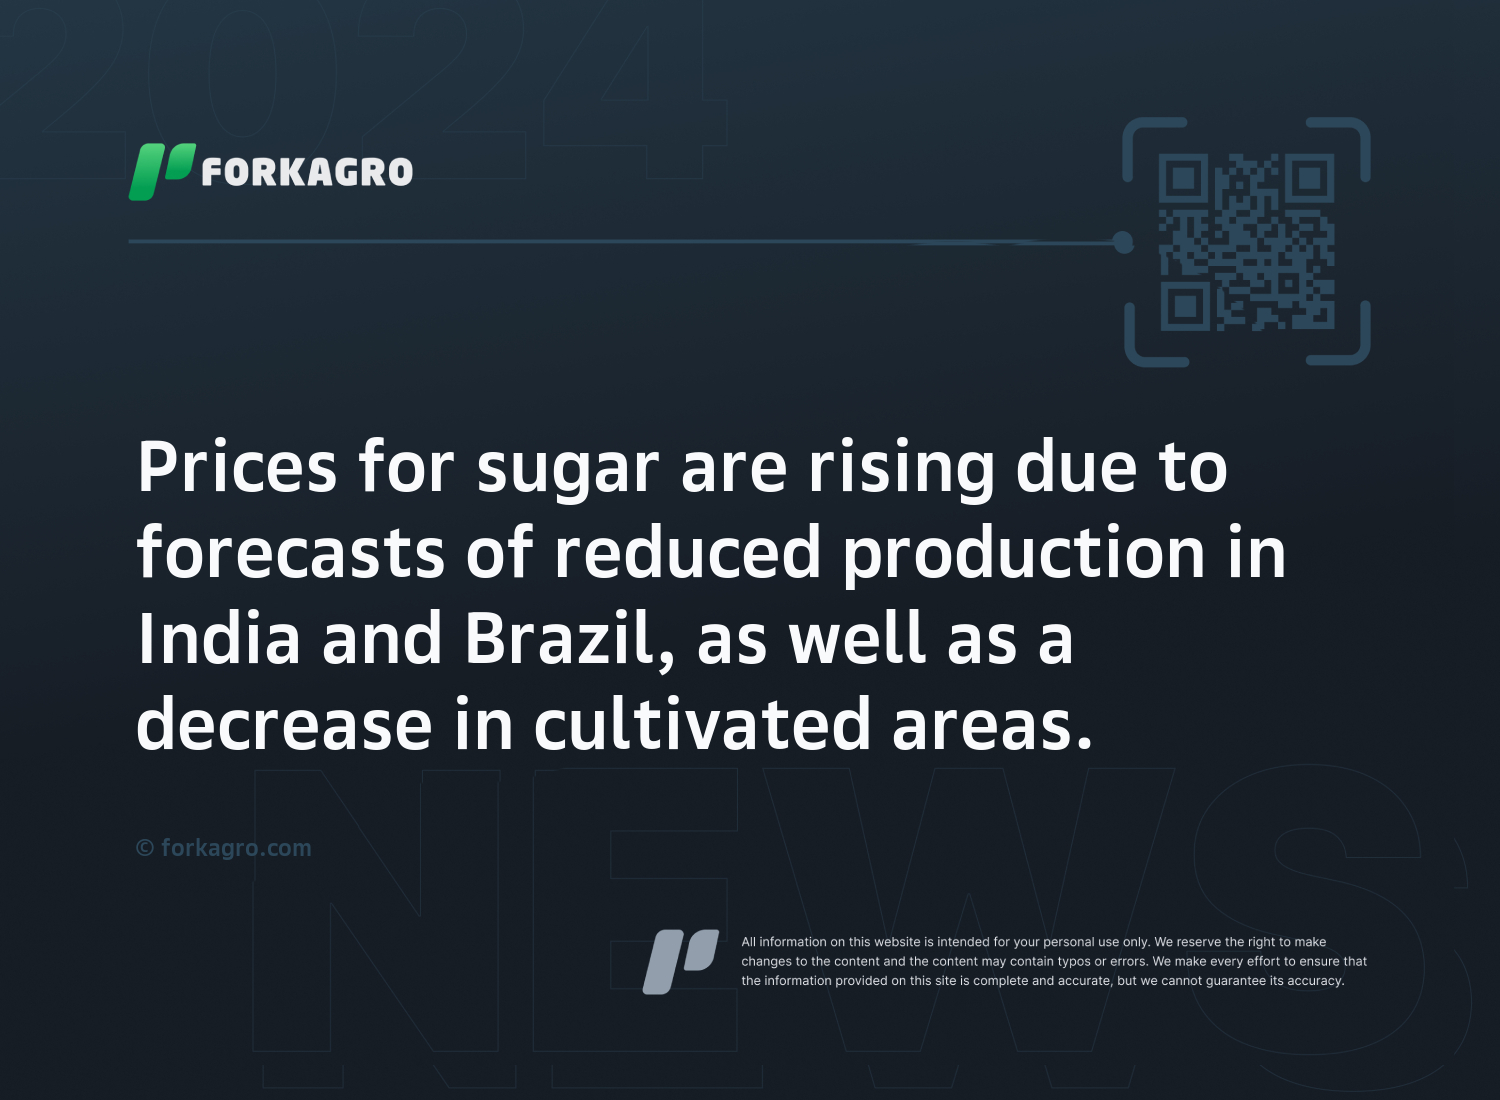 Prices for sugar are rising due to forecasts of reduced production in India and Brazil, as well as a decrease in cultivated areas.